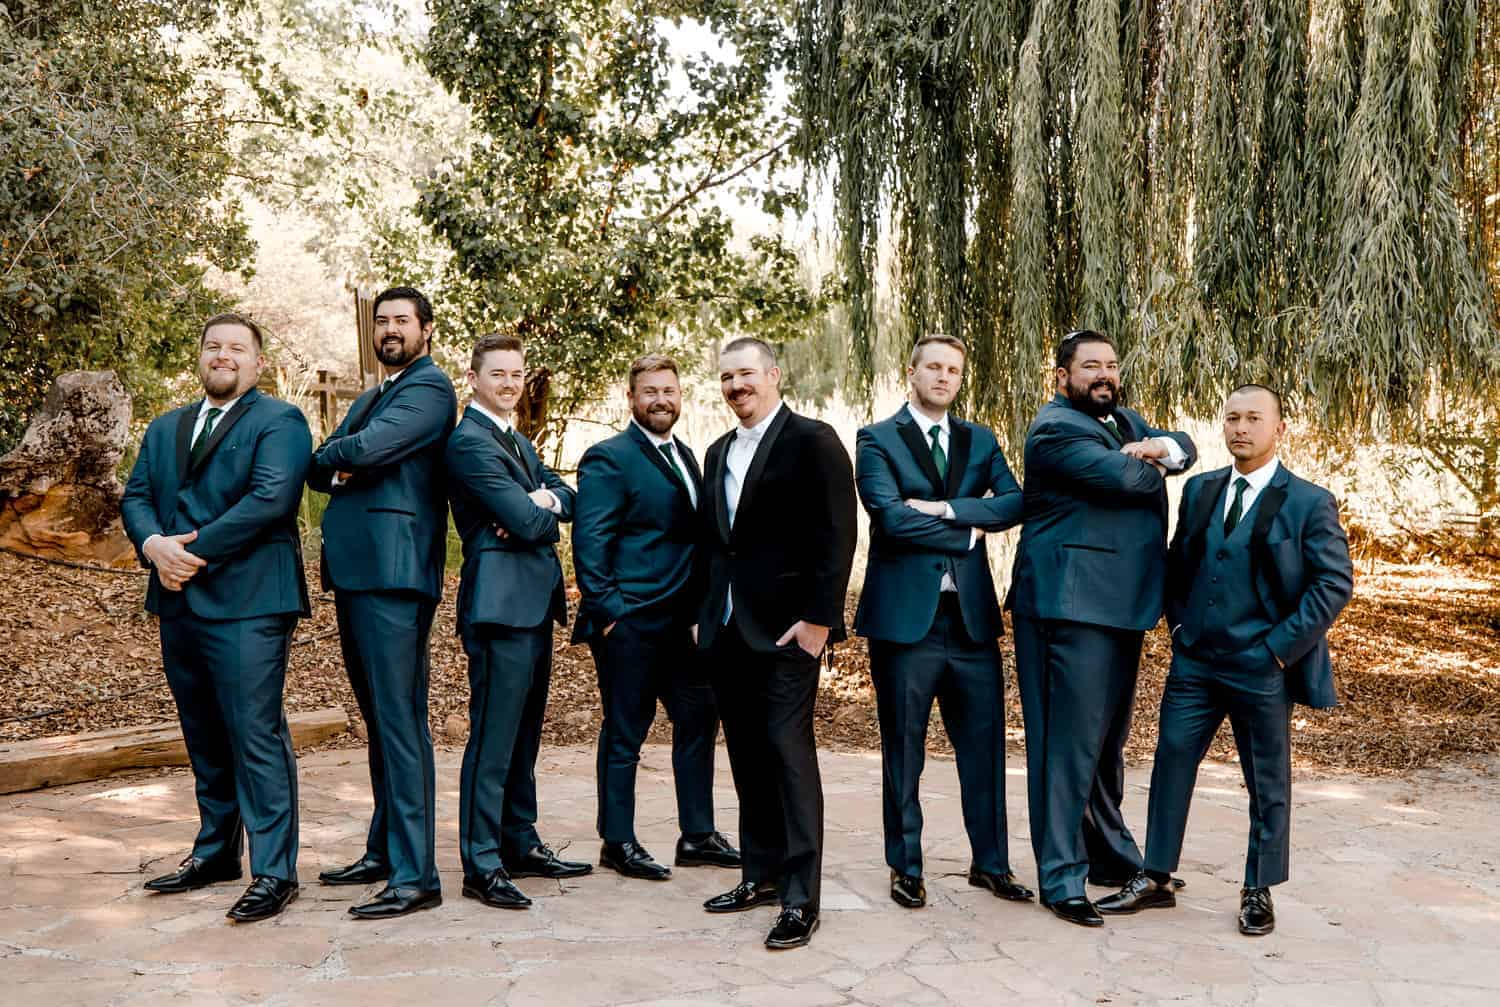 A group of groomsmen posing for a photo.